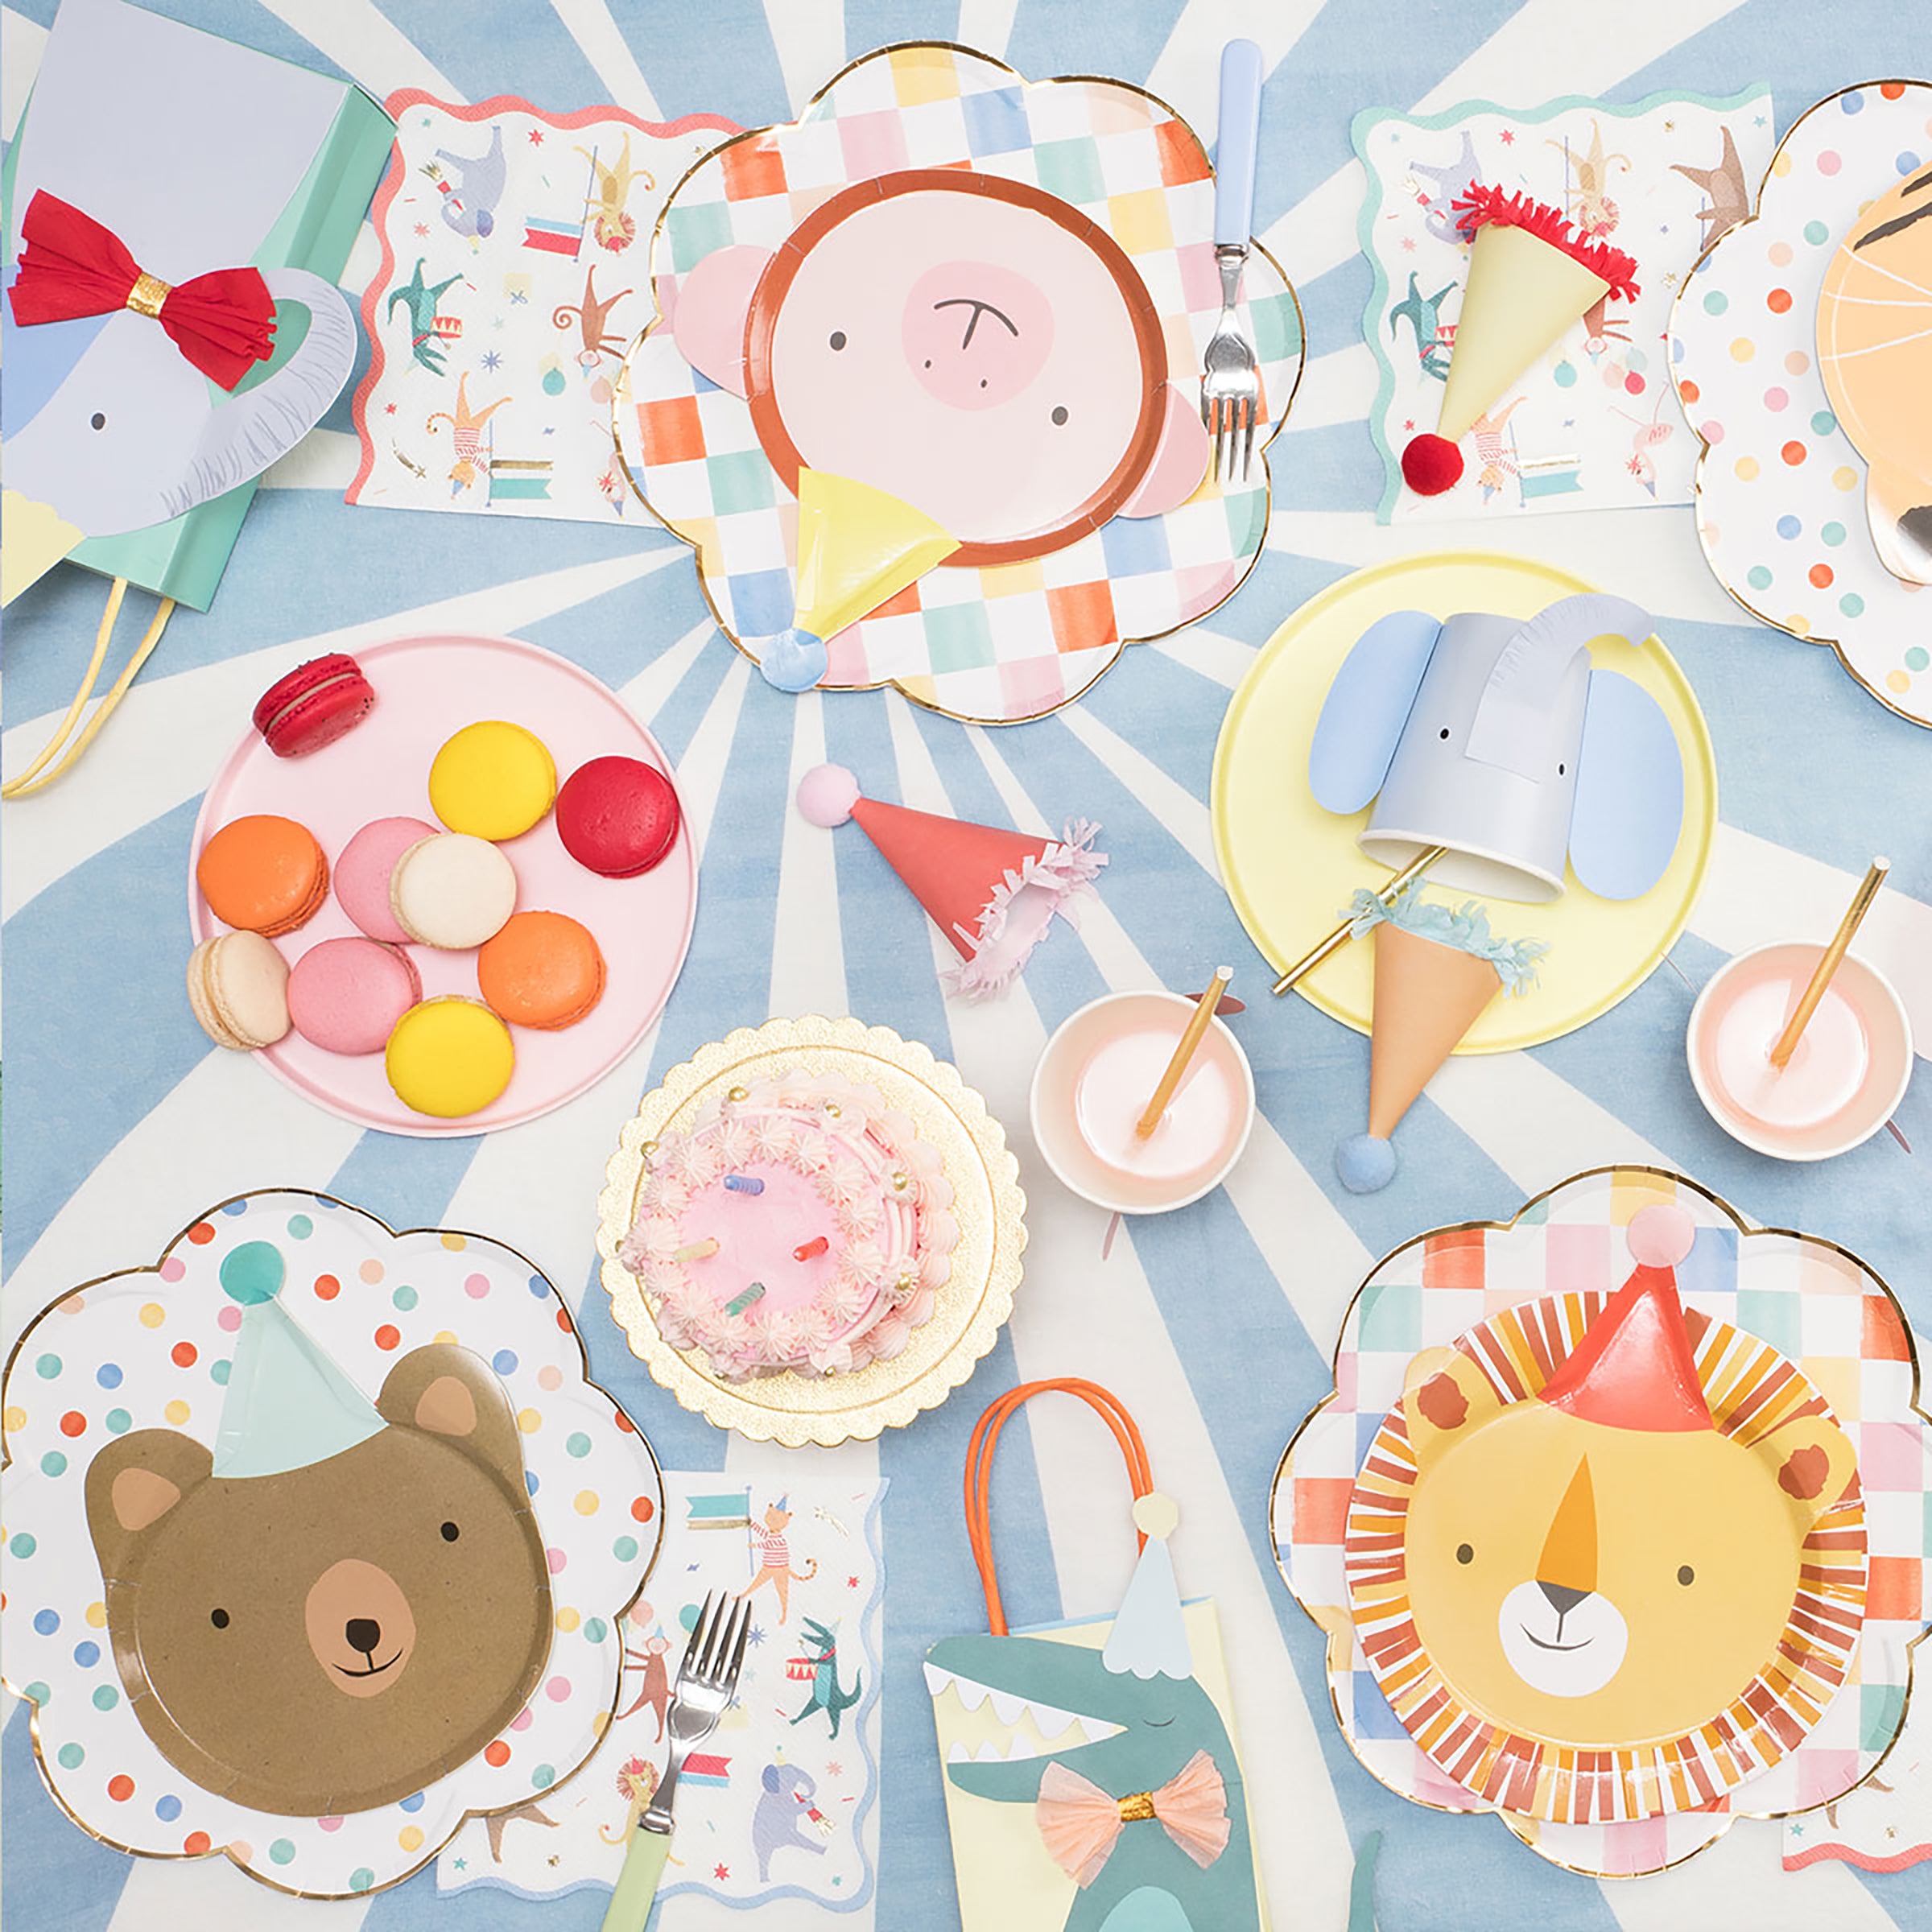 These kids party plates feature a bear plate, monkey plates, tiger plates and lion plates with pom poms.